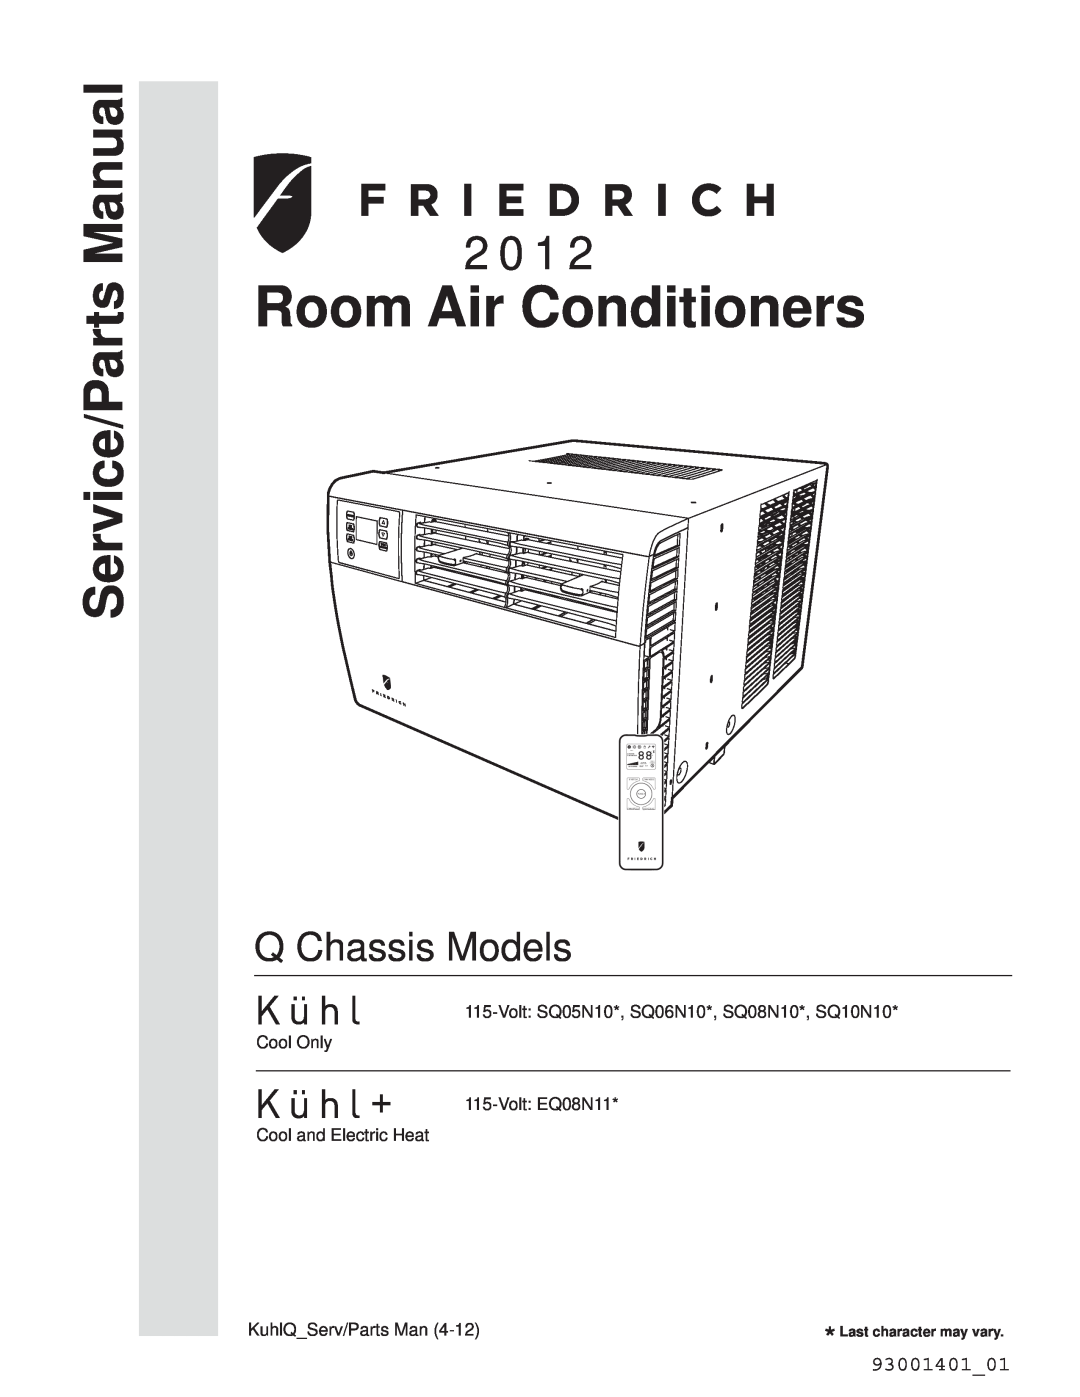 Friedrich SQ08N10 manual Room Air Conditioners, Service/Parts Manual, 2 0 1, Q Chassis Models, 93001401_01, System, Power 